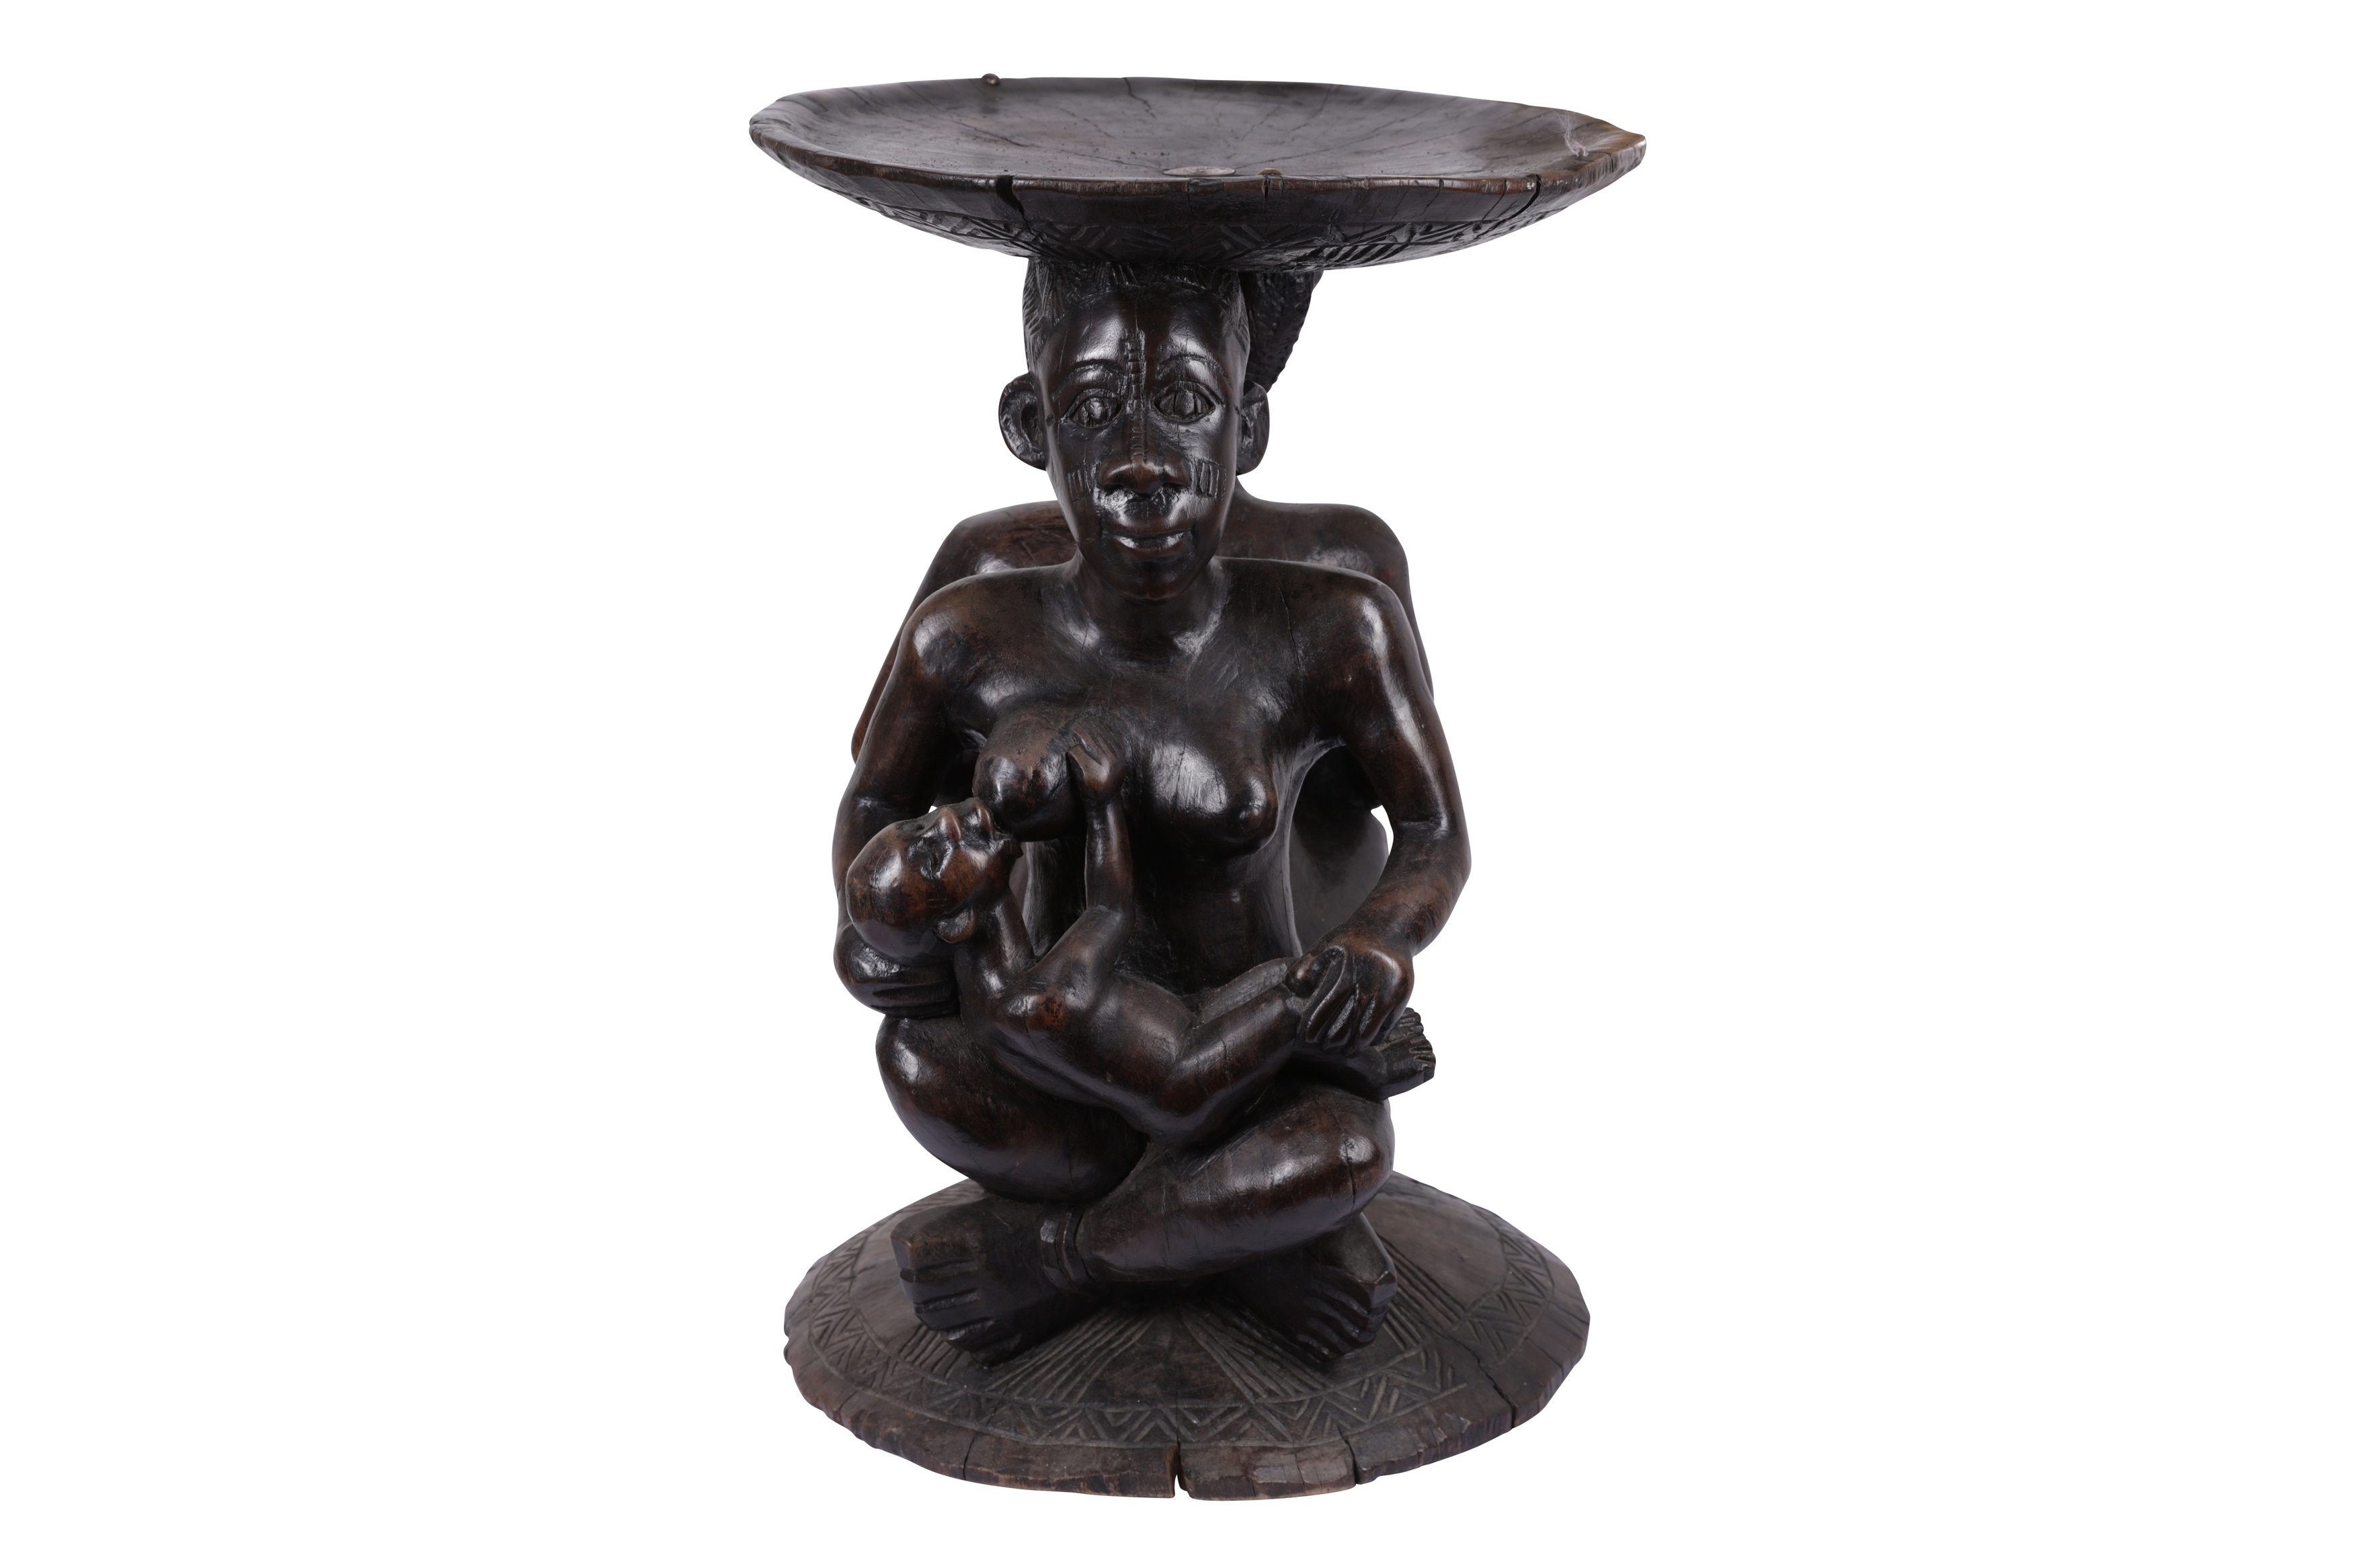 A WEST AFRICAN TRIBAL CARVED HARDWOOD MATERNITY FIGURE STOOL / TABLE - Image 4 of 6